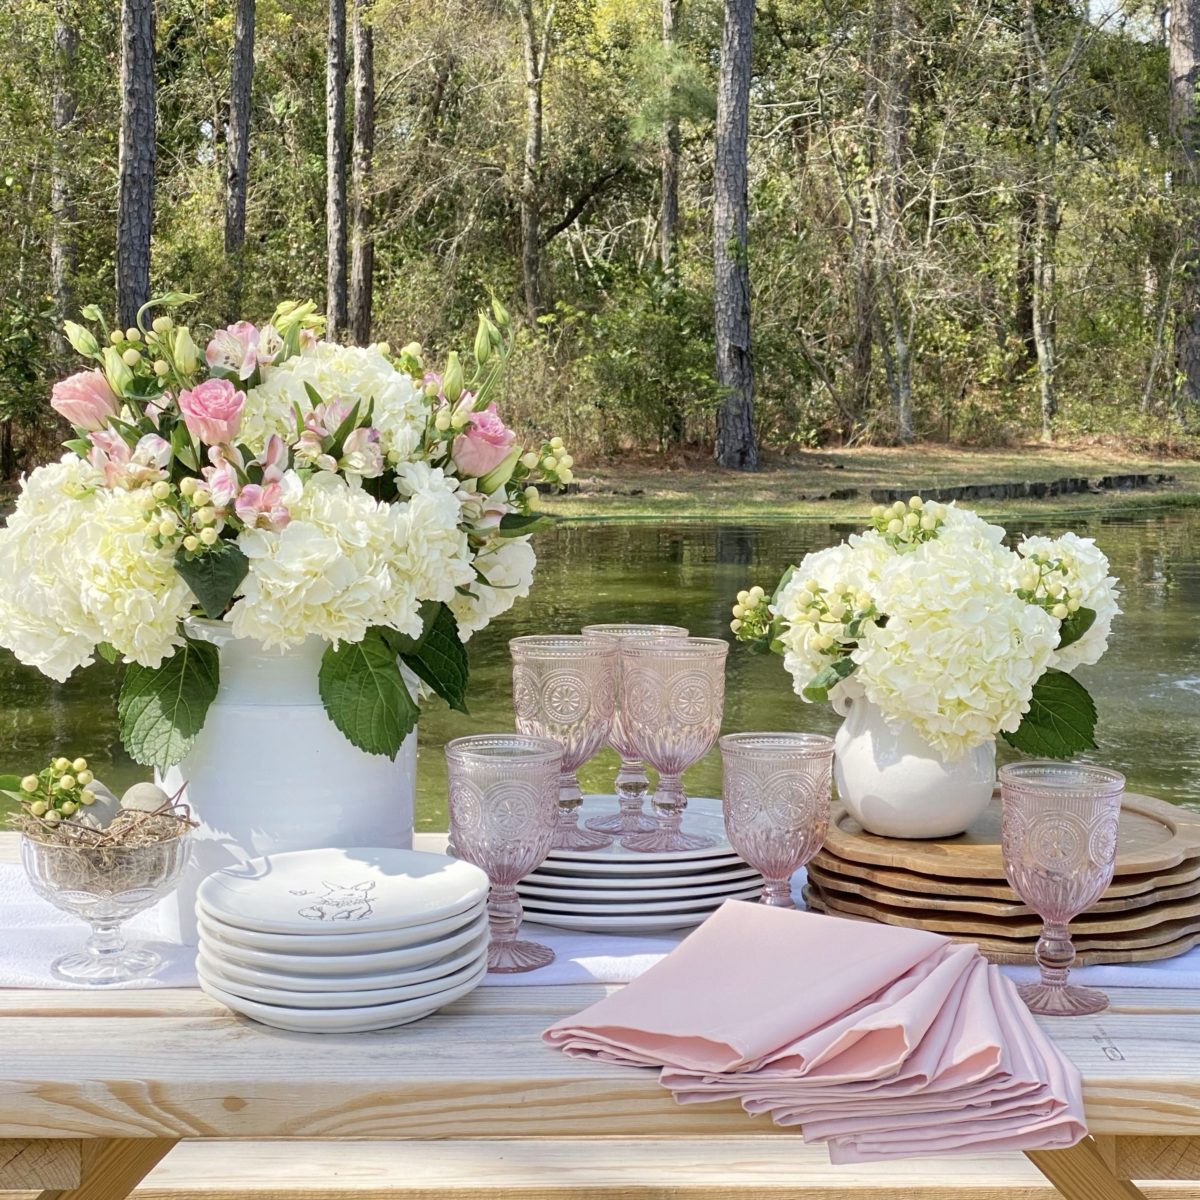 Wood chargers, white plates, pink napkins and glass with spring florals ready to be set on the picnic table by the pond., 